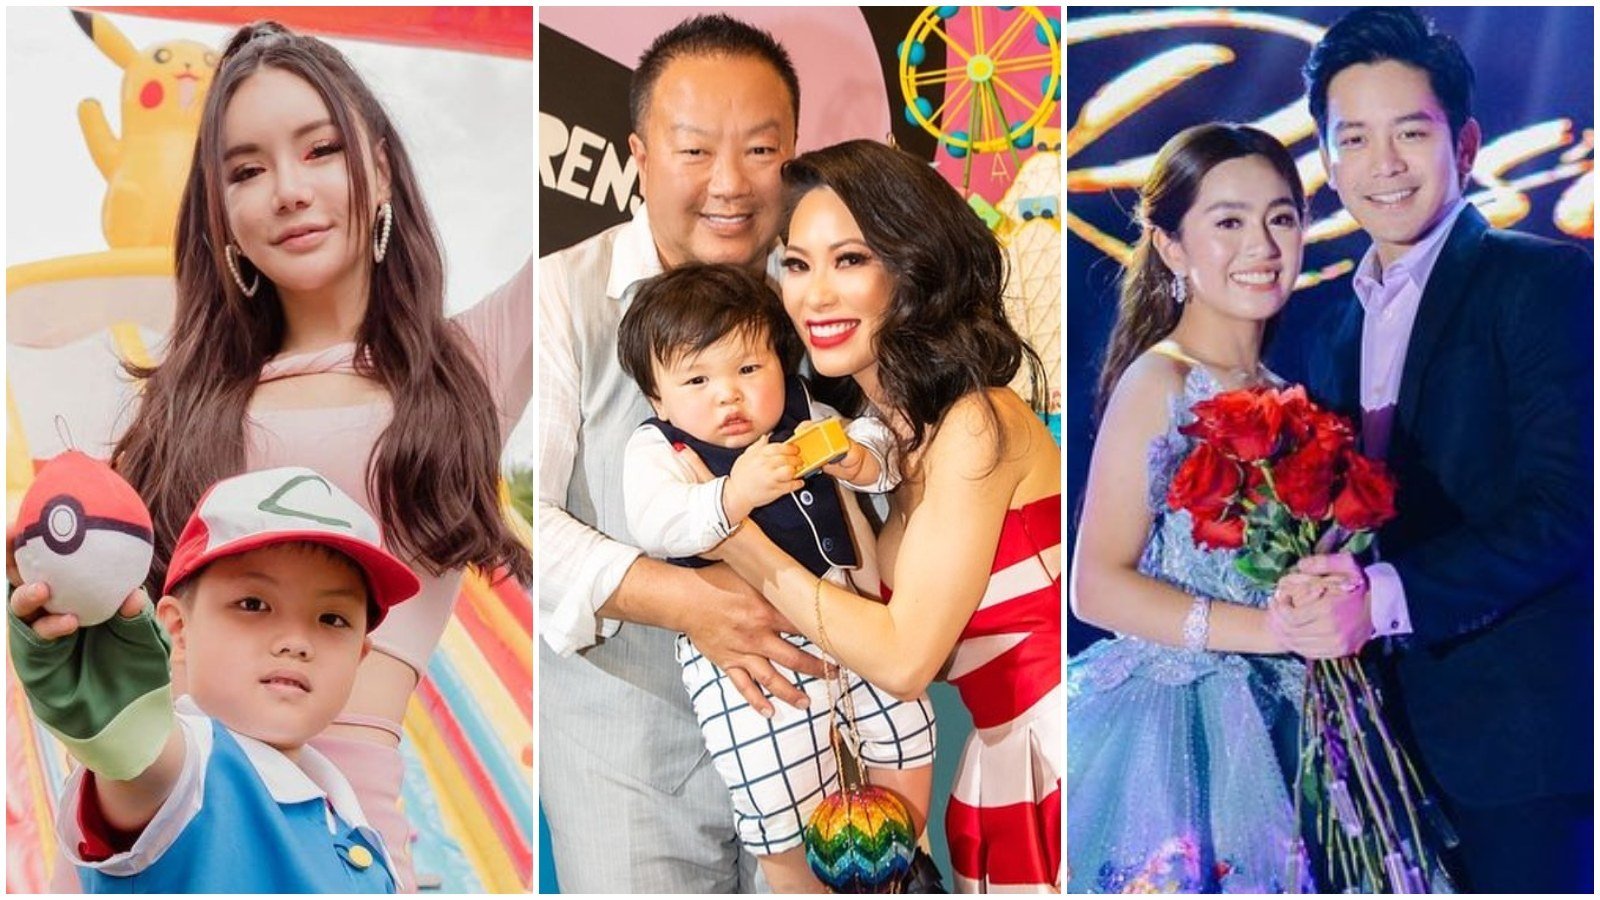 Kim Lim, Christine Chiu and Christine Lim all threw epic birthday parties for themselves or their loved ones. Photos: @drchiubhps @limmchristine @theweddingatelier.co/ all Instagram